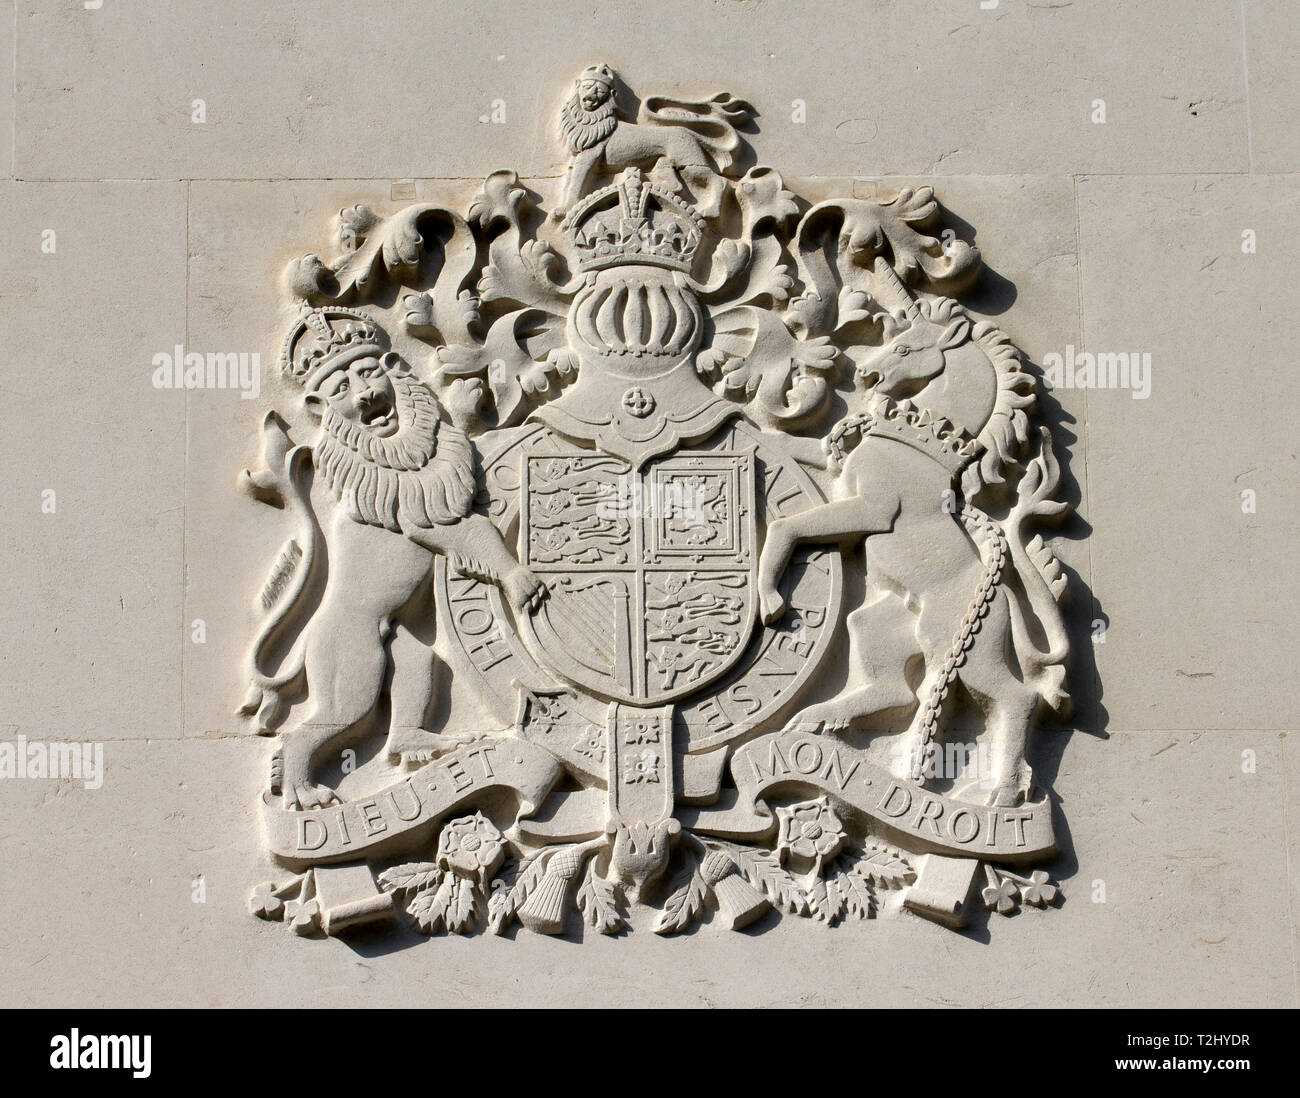 royal coat of arms of the United Kingdom Stock Photo